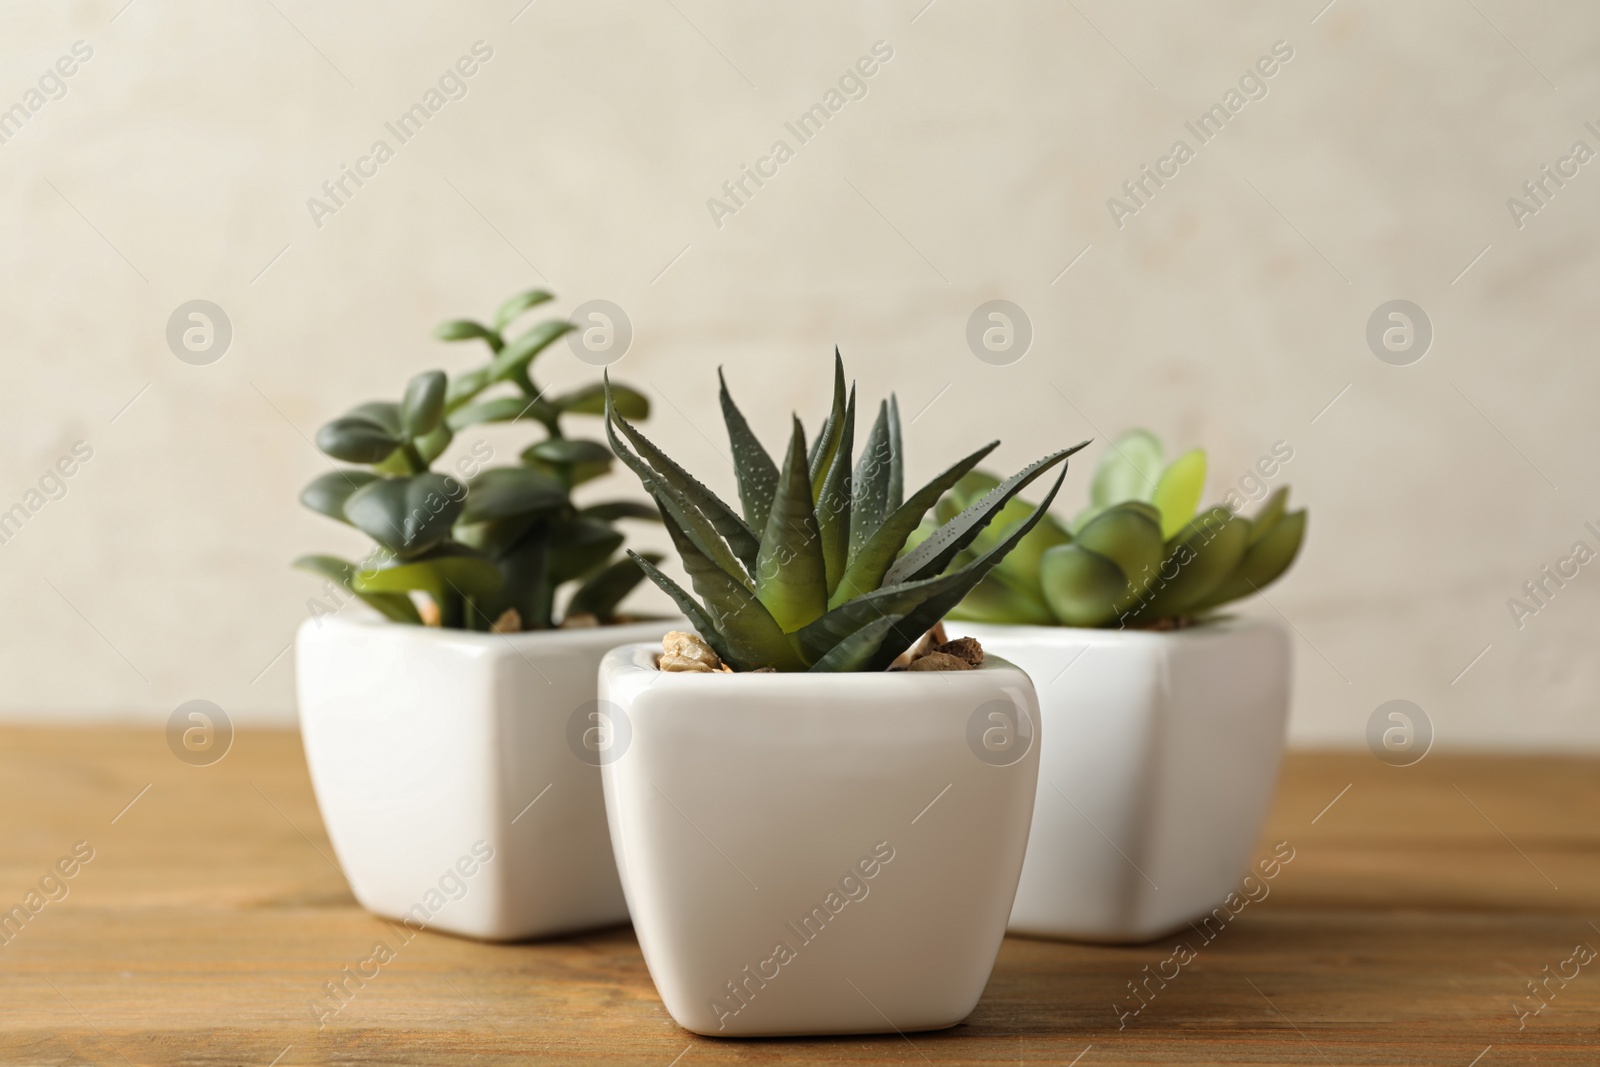 Photo of Artificial plants in white flower pots on wooden table